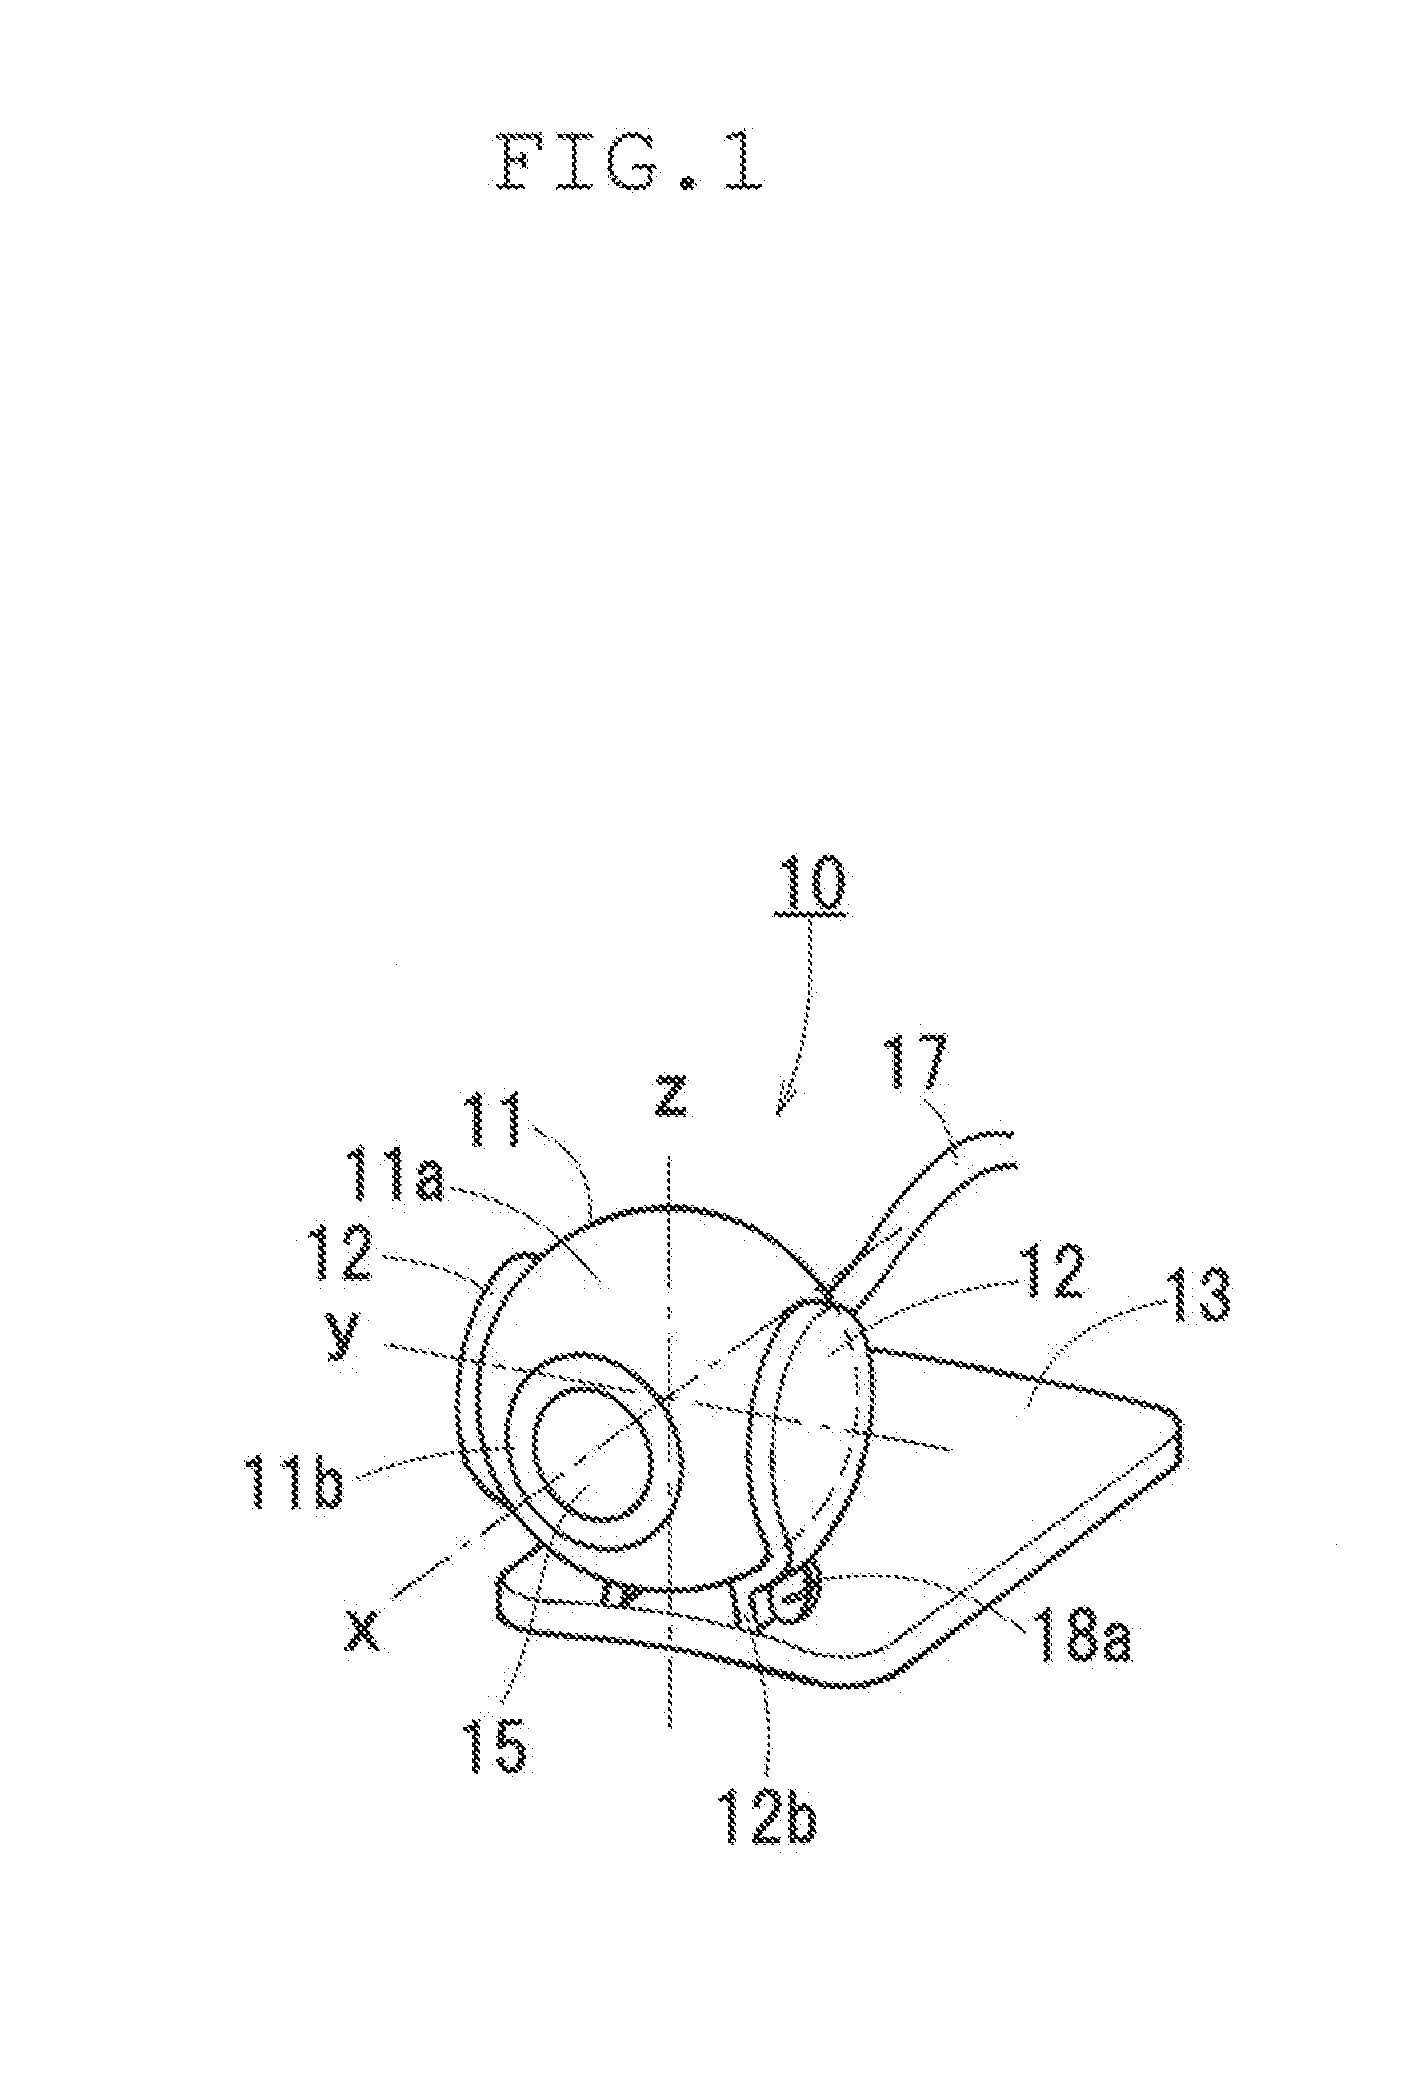 Camera device with reduced size